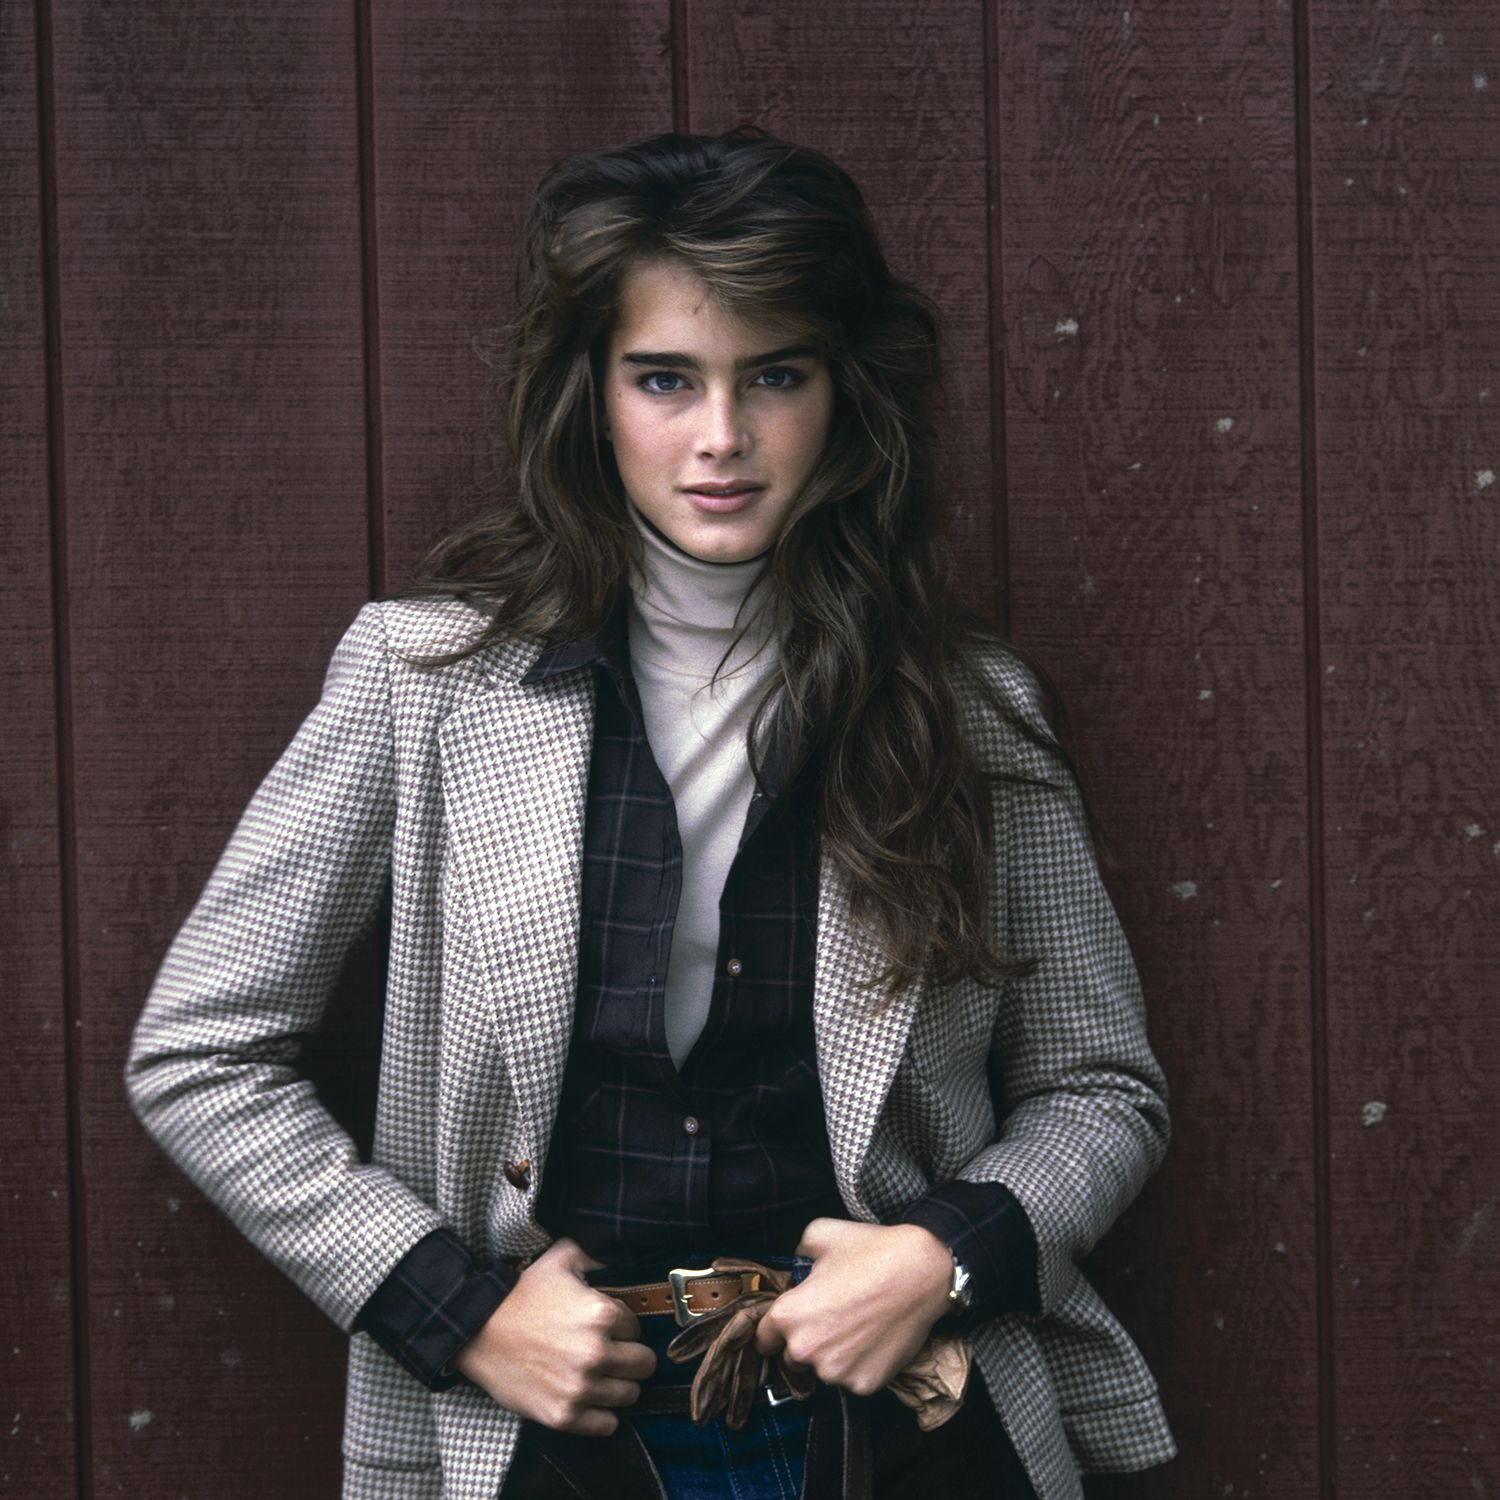 Hbz 80s Fashion 1982 Brooke Shields Gettyimages 52325143 